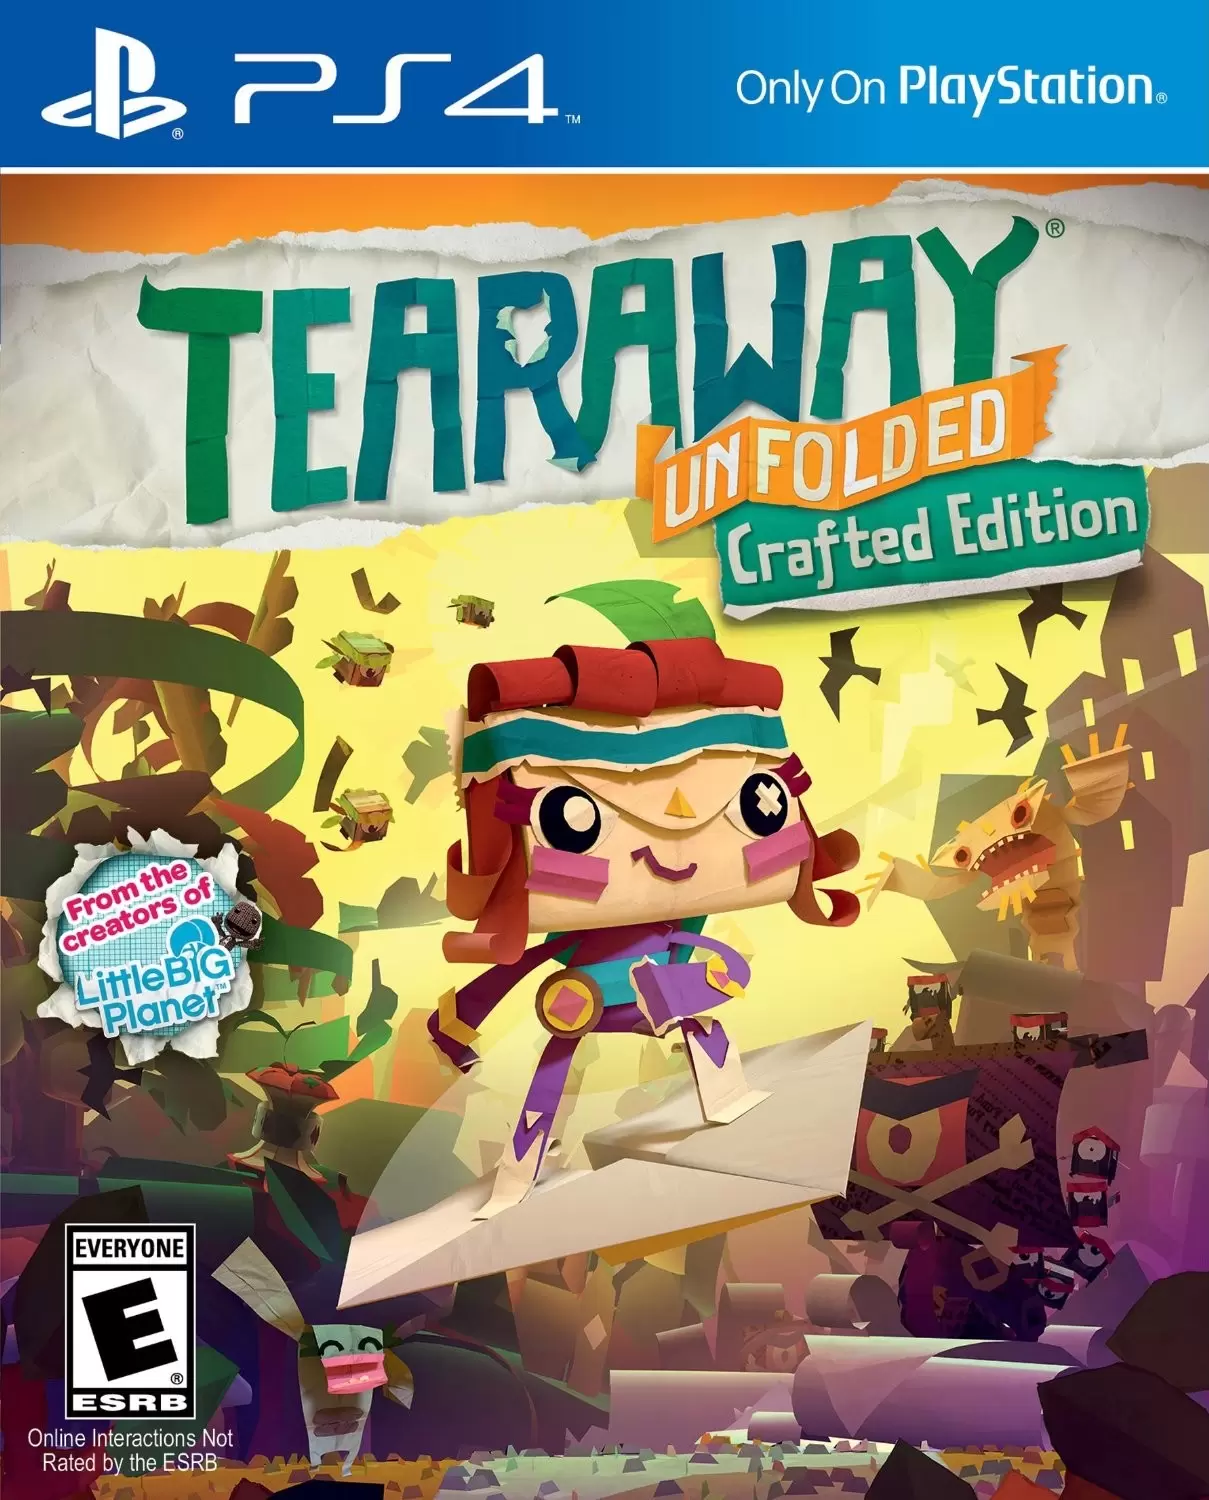 PS4 Games - Tearaway Unfolded Crafted Edition